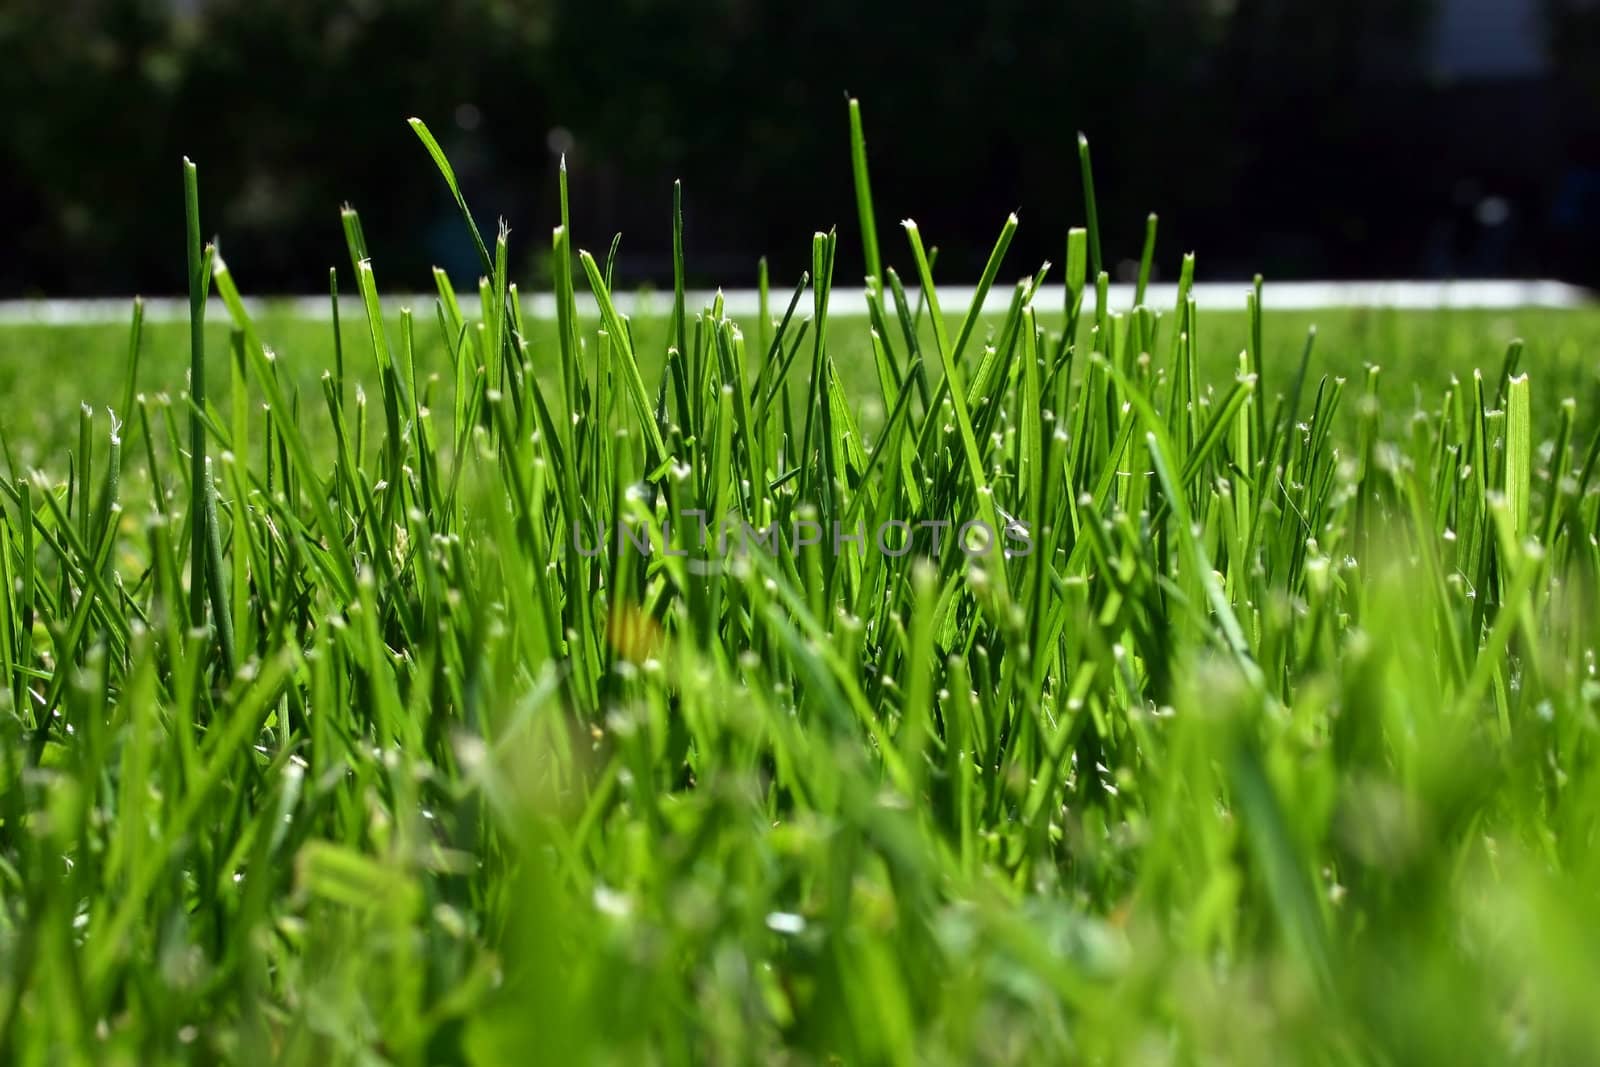 Green Grass by micahbowerbank